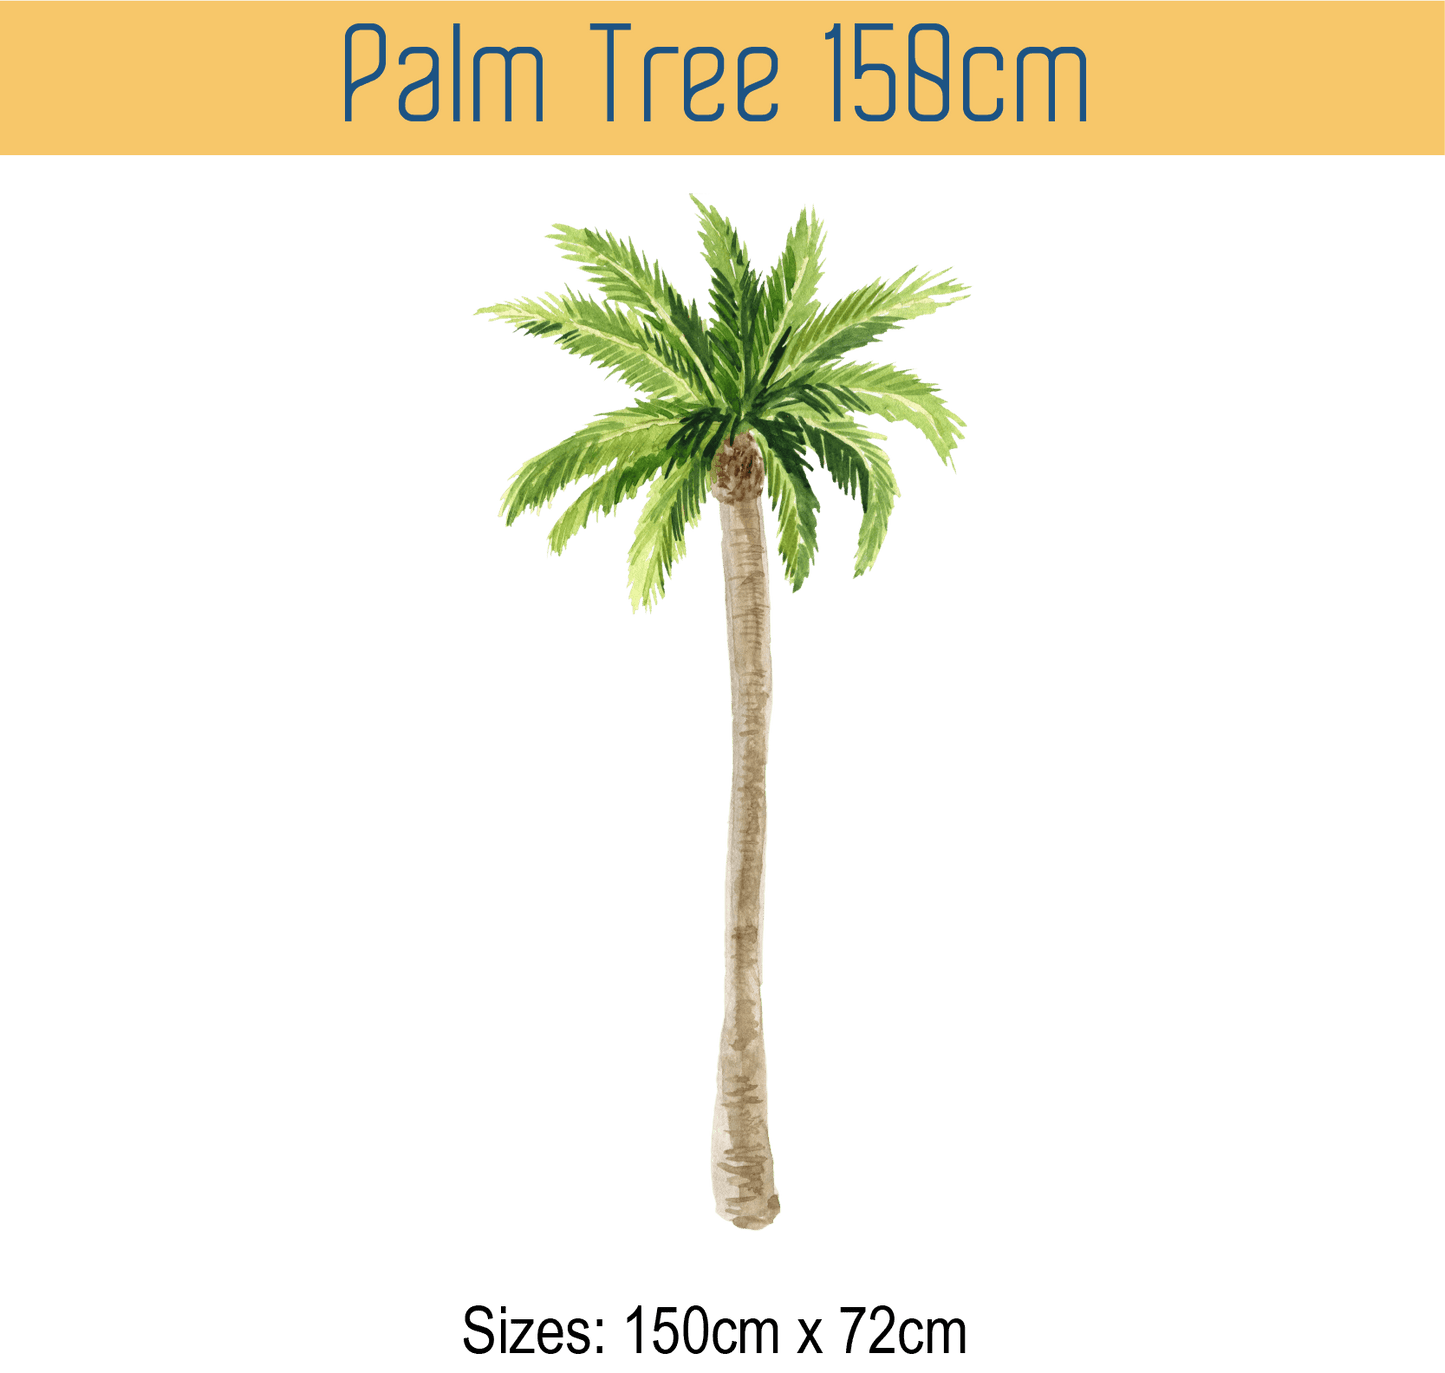 150cm Palm Tree Large Wall Sticker Decals with removable fabric.